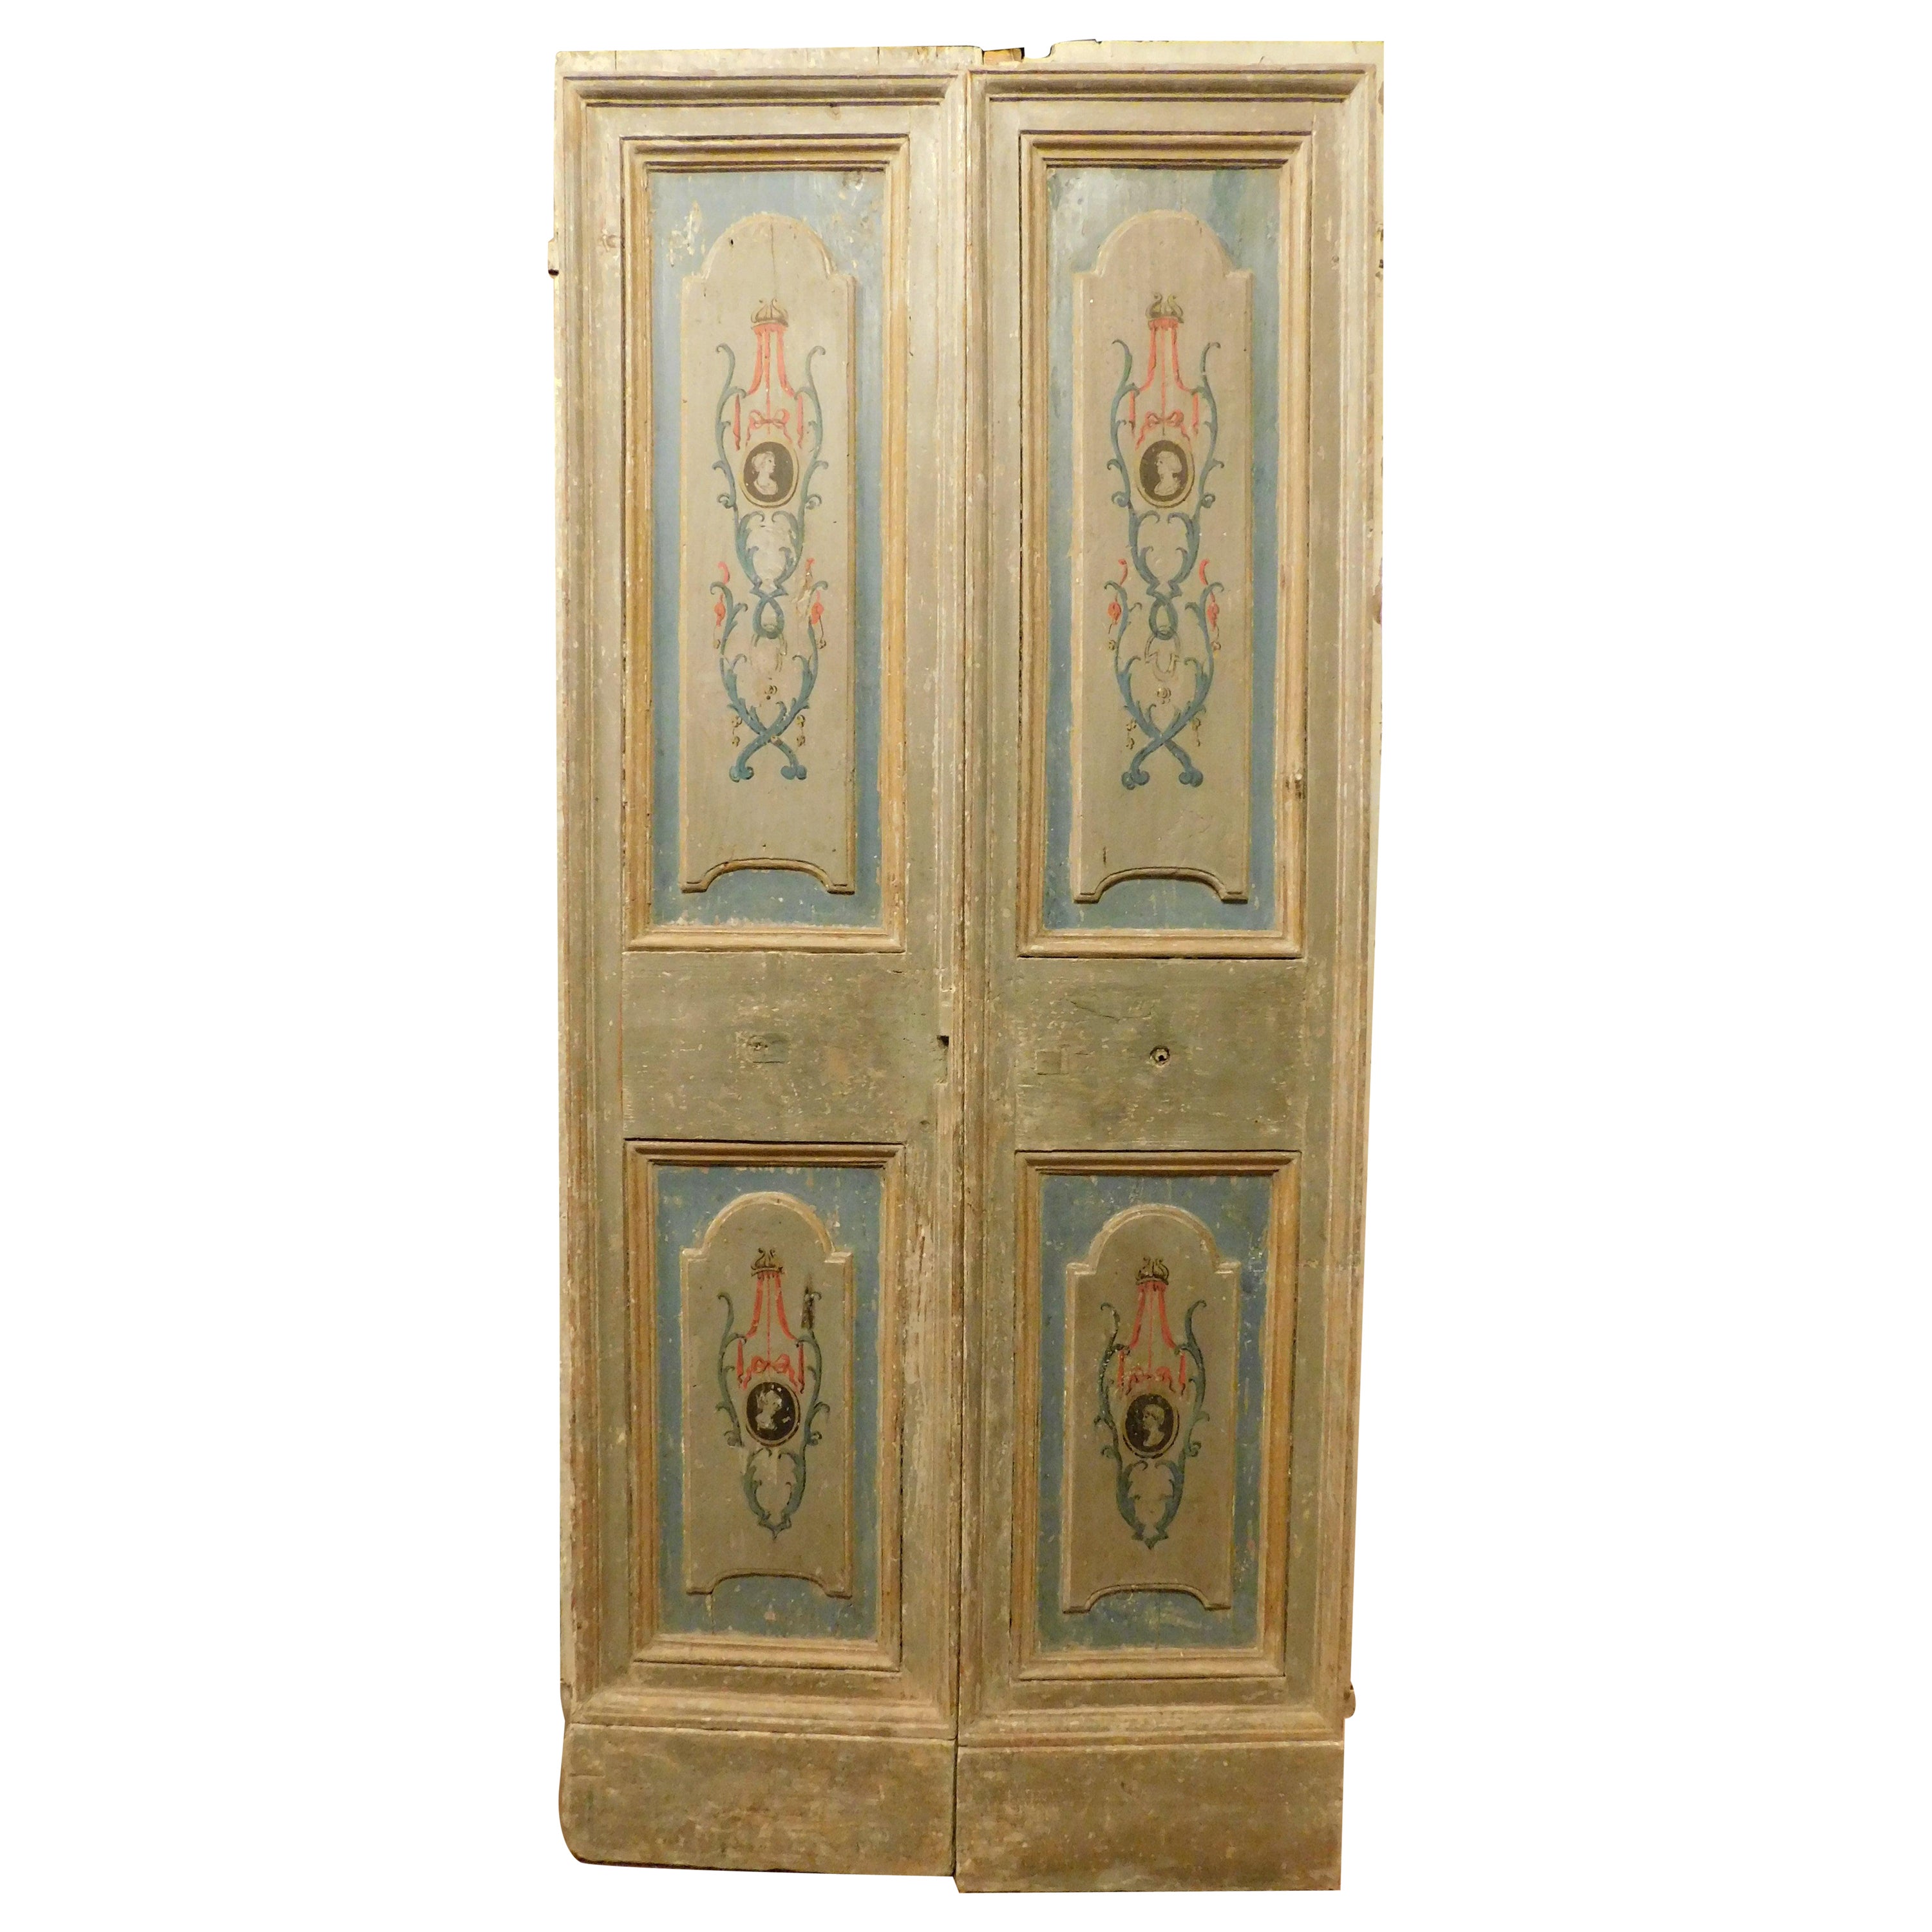 Old painted double door, from Naples Italy